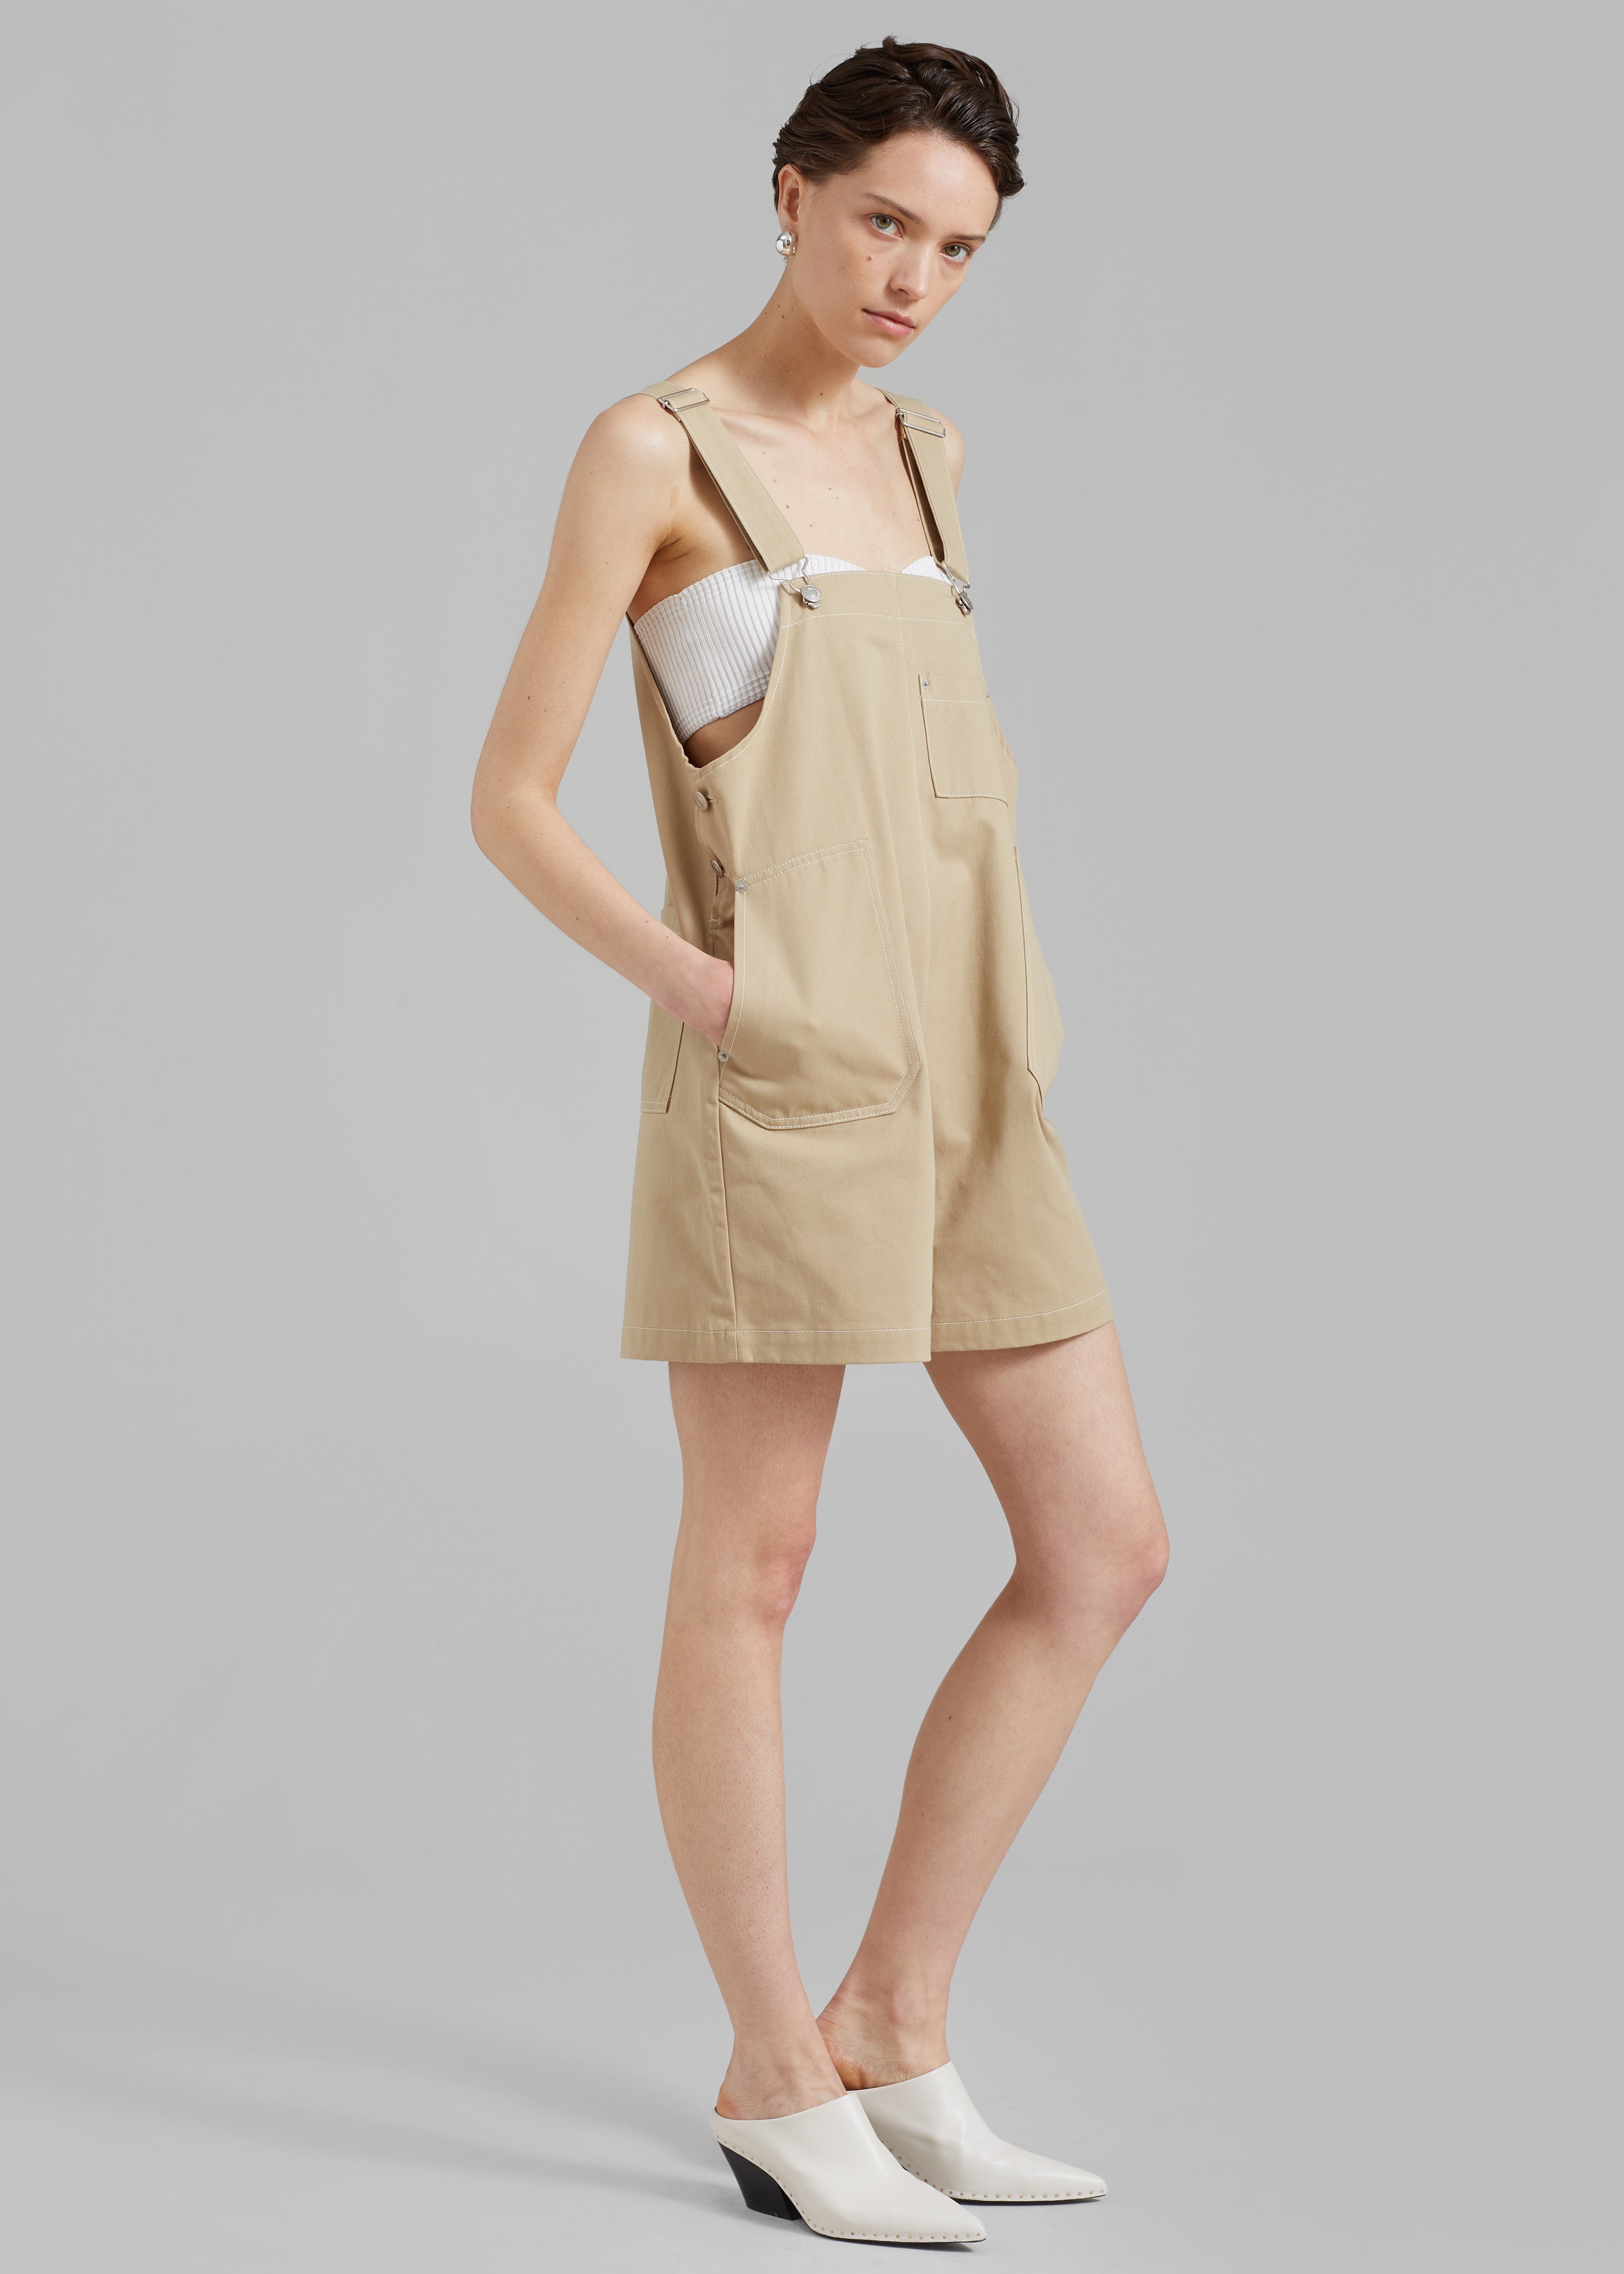 Keeley Overall Shorts - Beige - 2